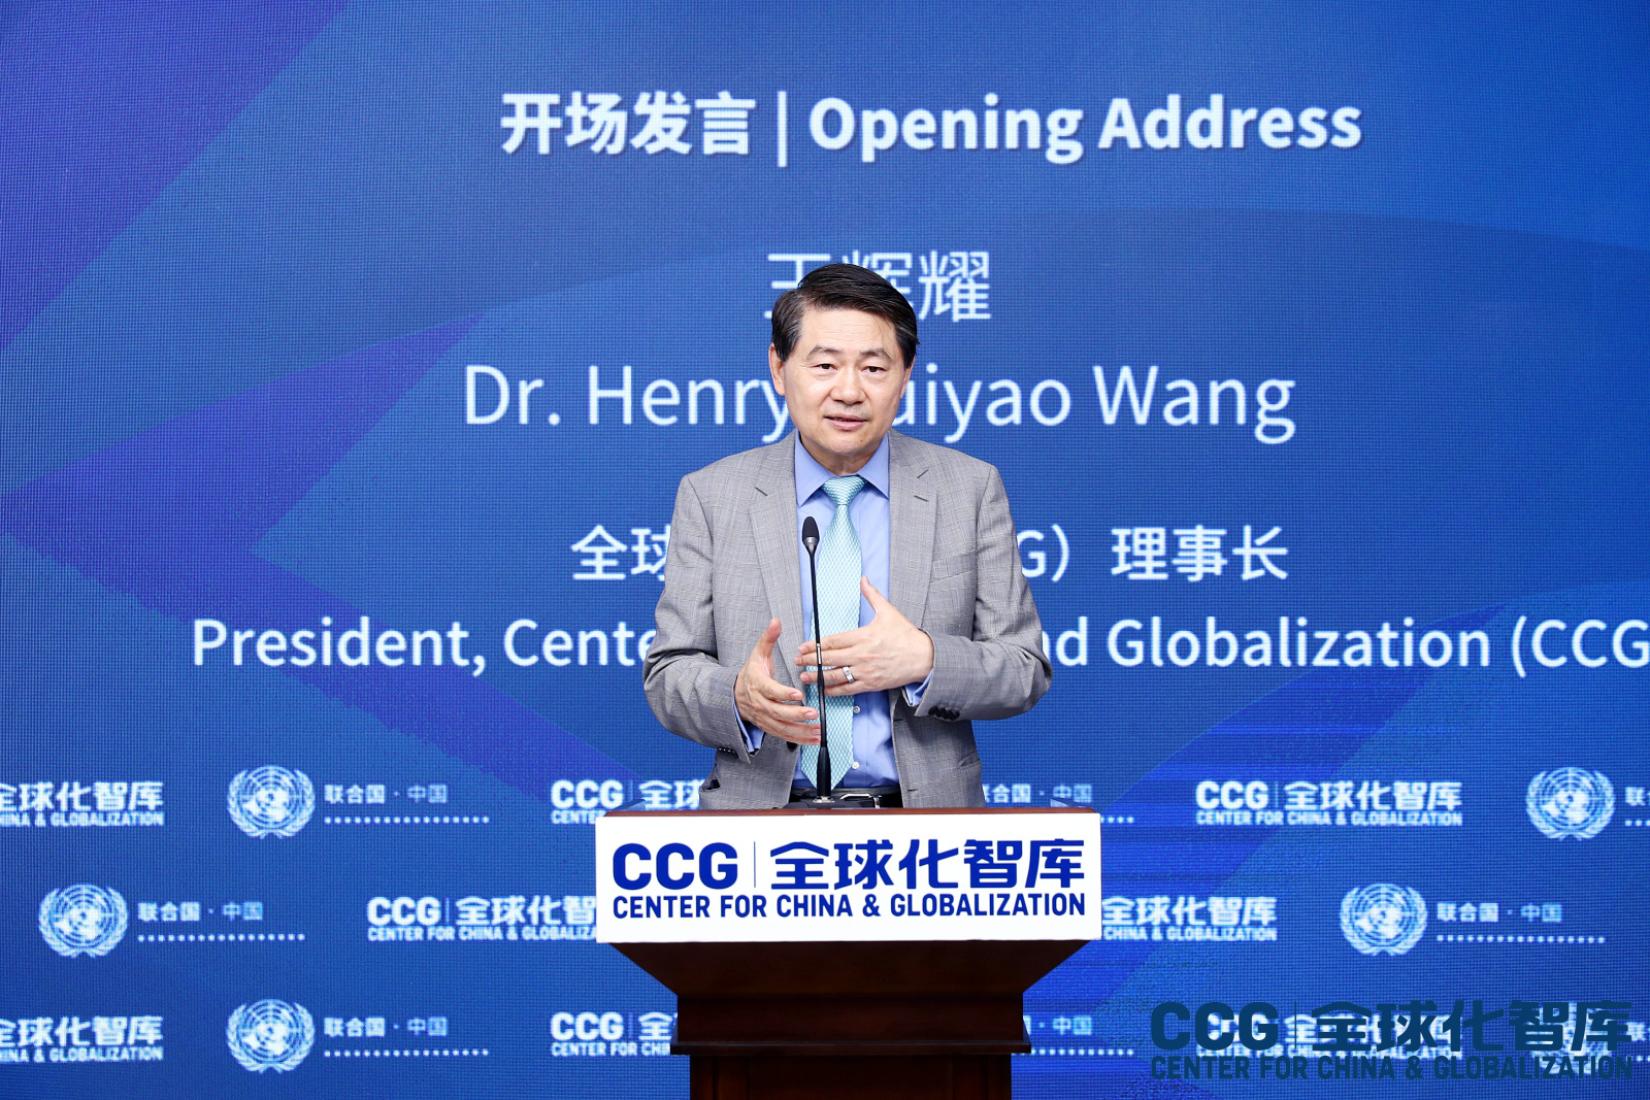 Dr. Henry Huiyao Wang, President, Center for China and Globalization